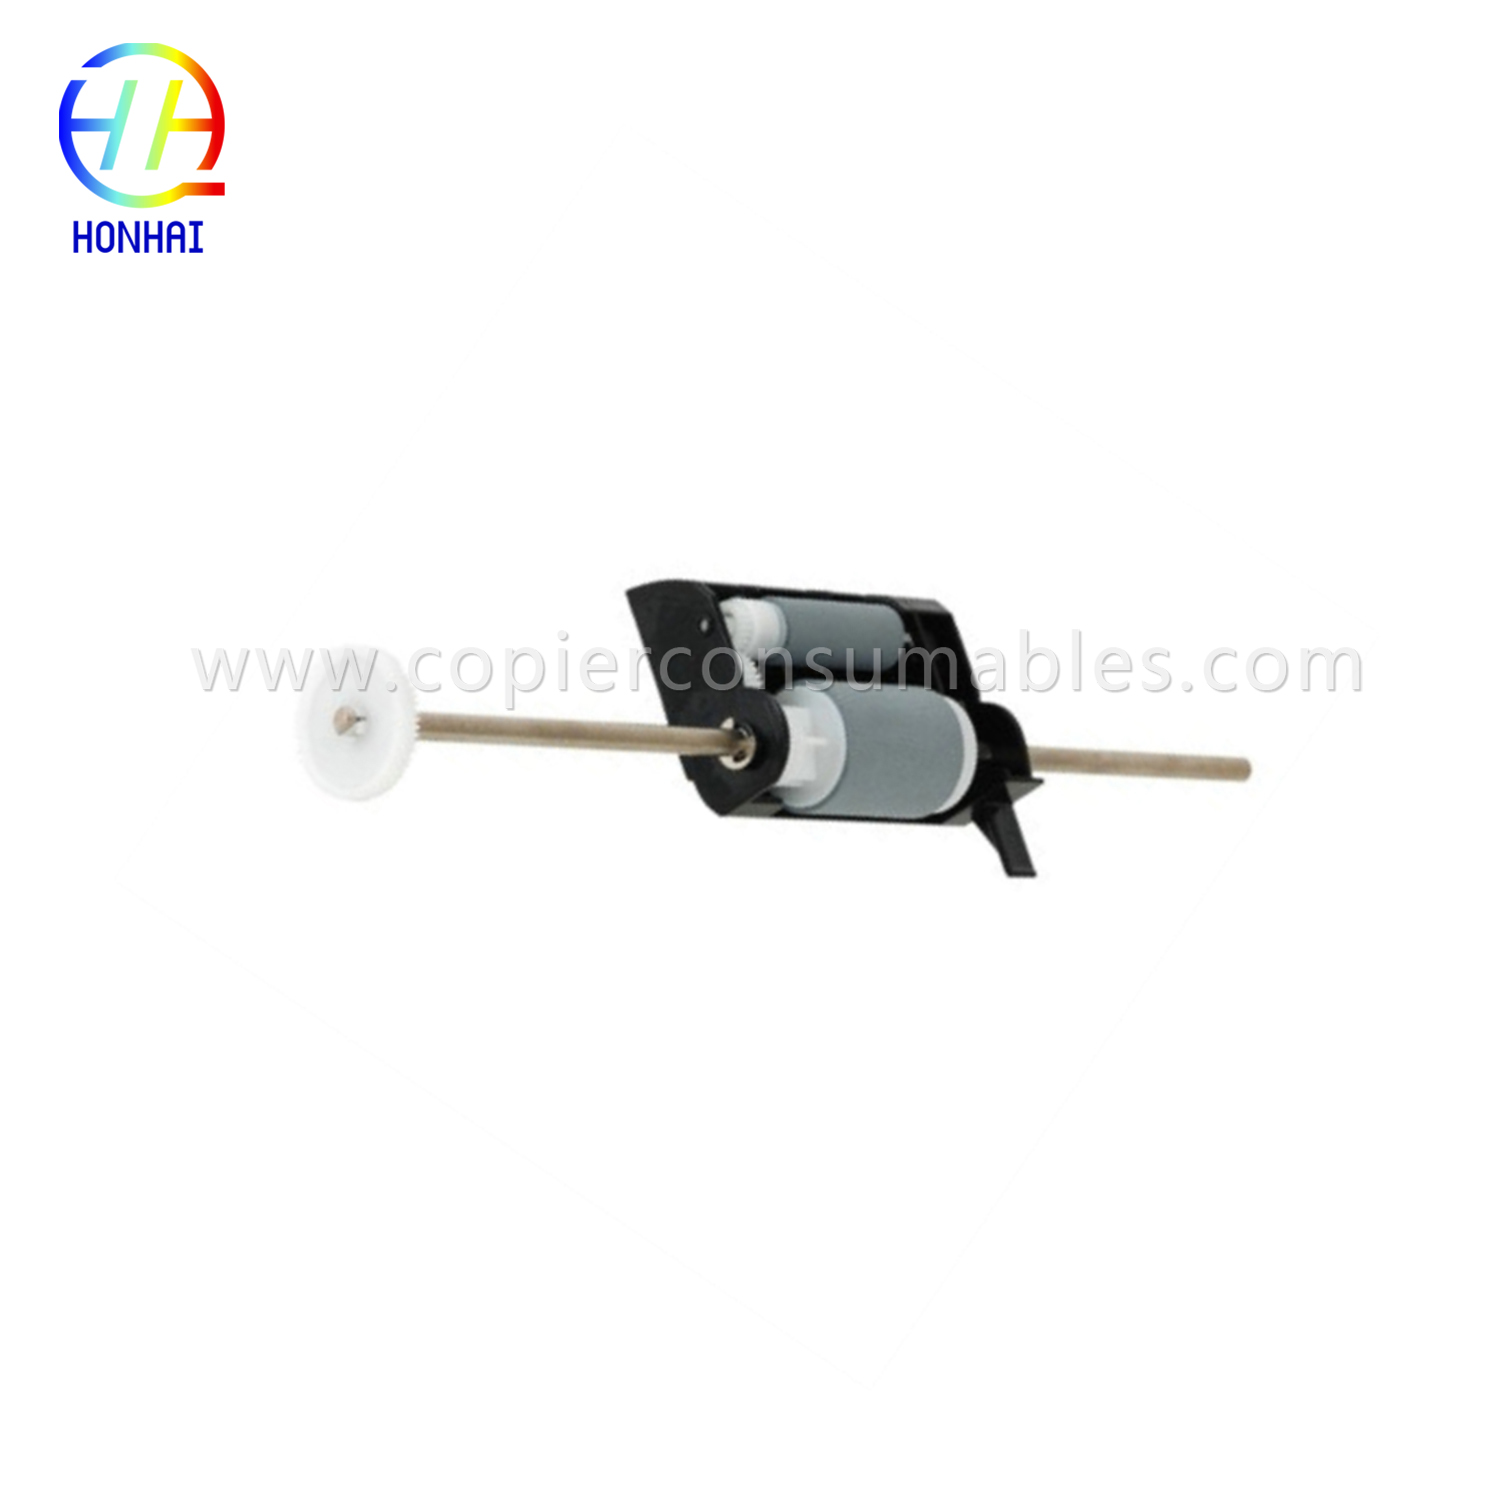 Document Separation Roller Assembly for Brother MFC-8710dw 8515 8910 8520 8510 8600 8900 8950 8370 DCP8150dn (Lx9098001) 拷贝